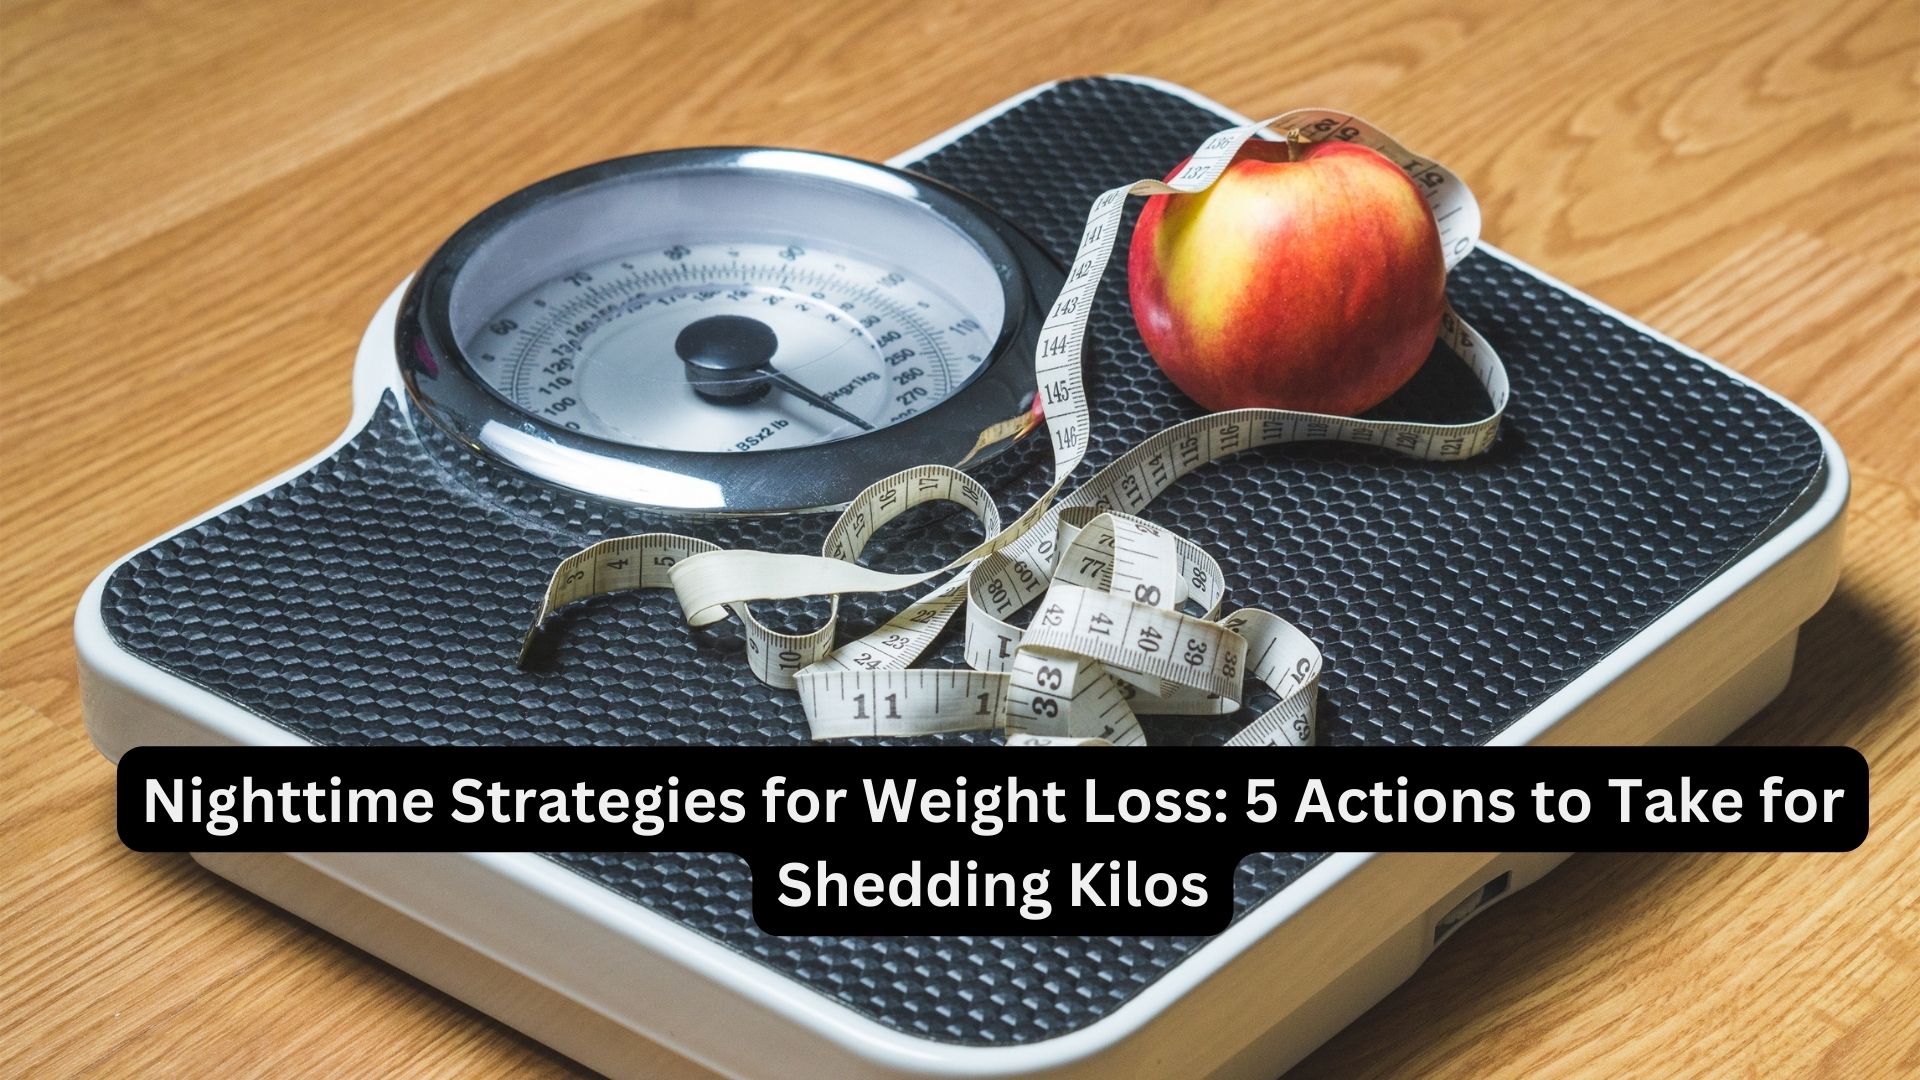 Nighttime Strategies for Weight Loss: 5 Actions to Take for Shedding Kilos